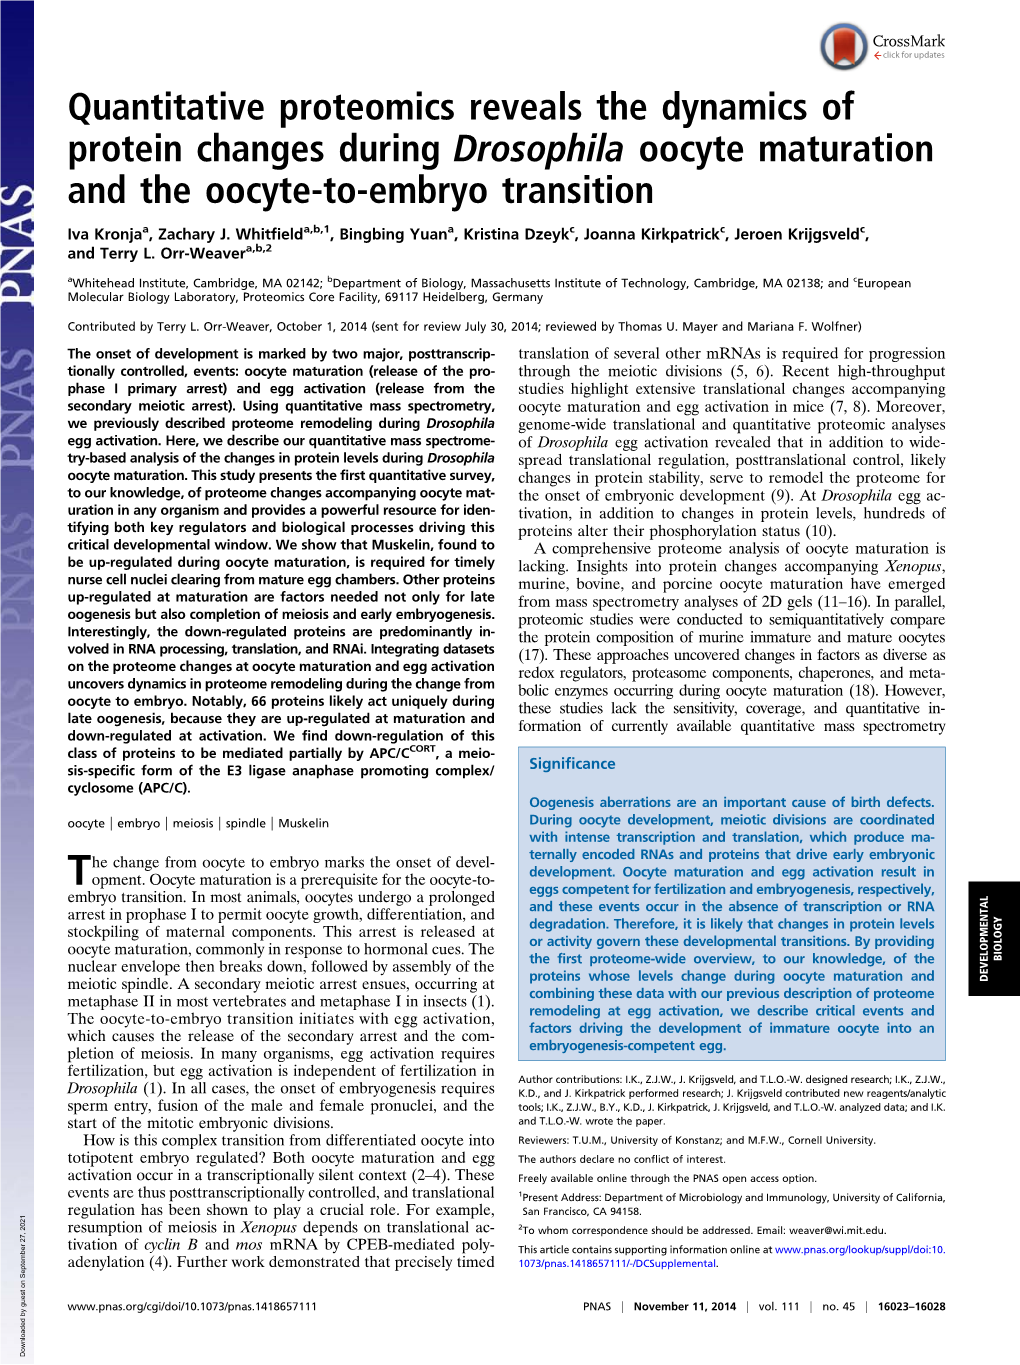 Quantitative Proteomics Reveals the Dynamics of Protein Changes During Drosophila Oocyte Maturation and the Oocyte-To-Embryo Transition